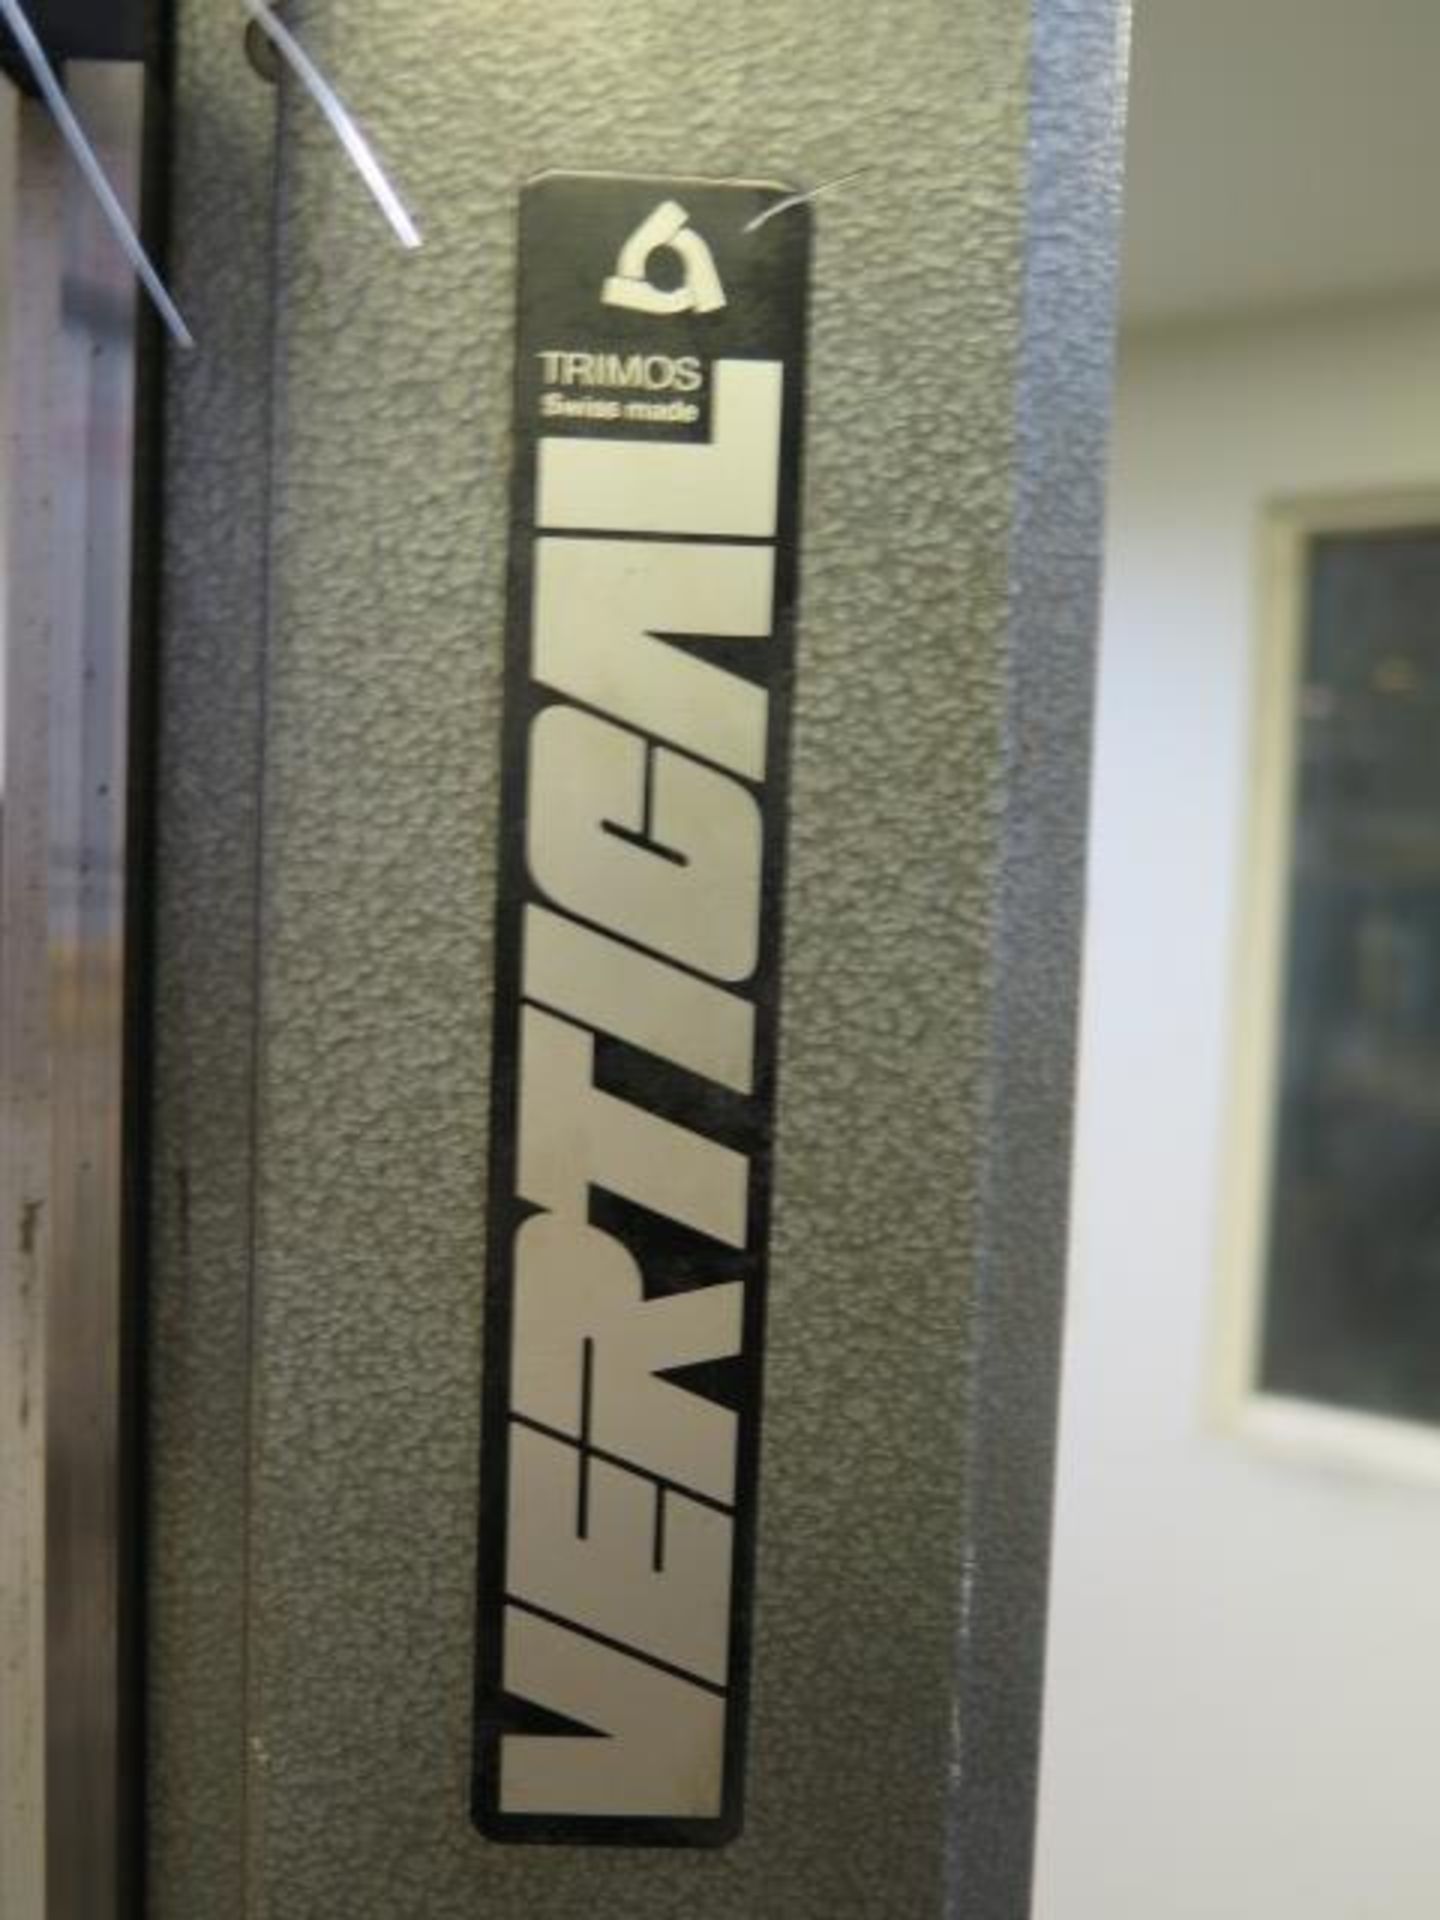 Fowler Trimos "Vertical" 18" Digital Height Gage (SOLD AS-IS - NO WARRANTY) - Image 11 of 13